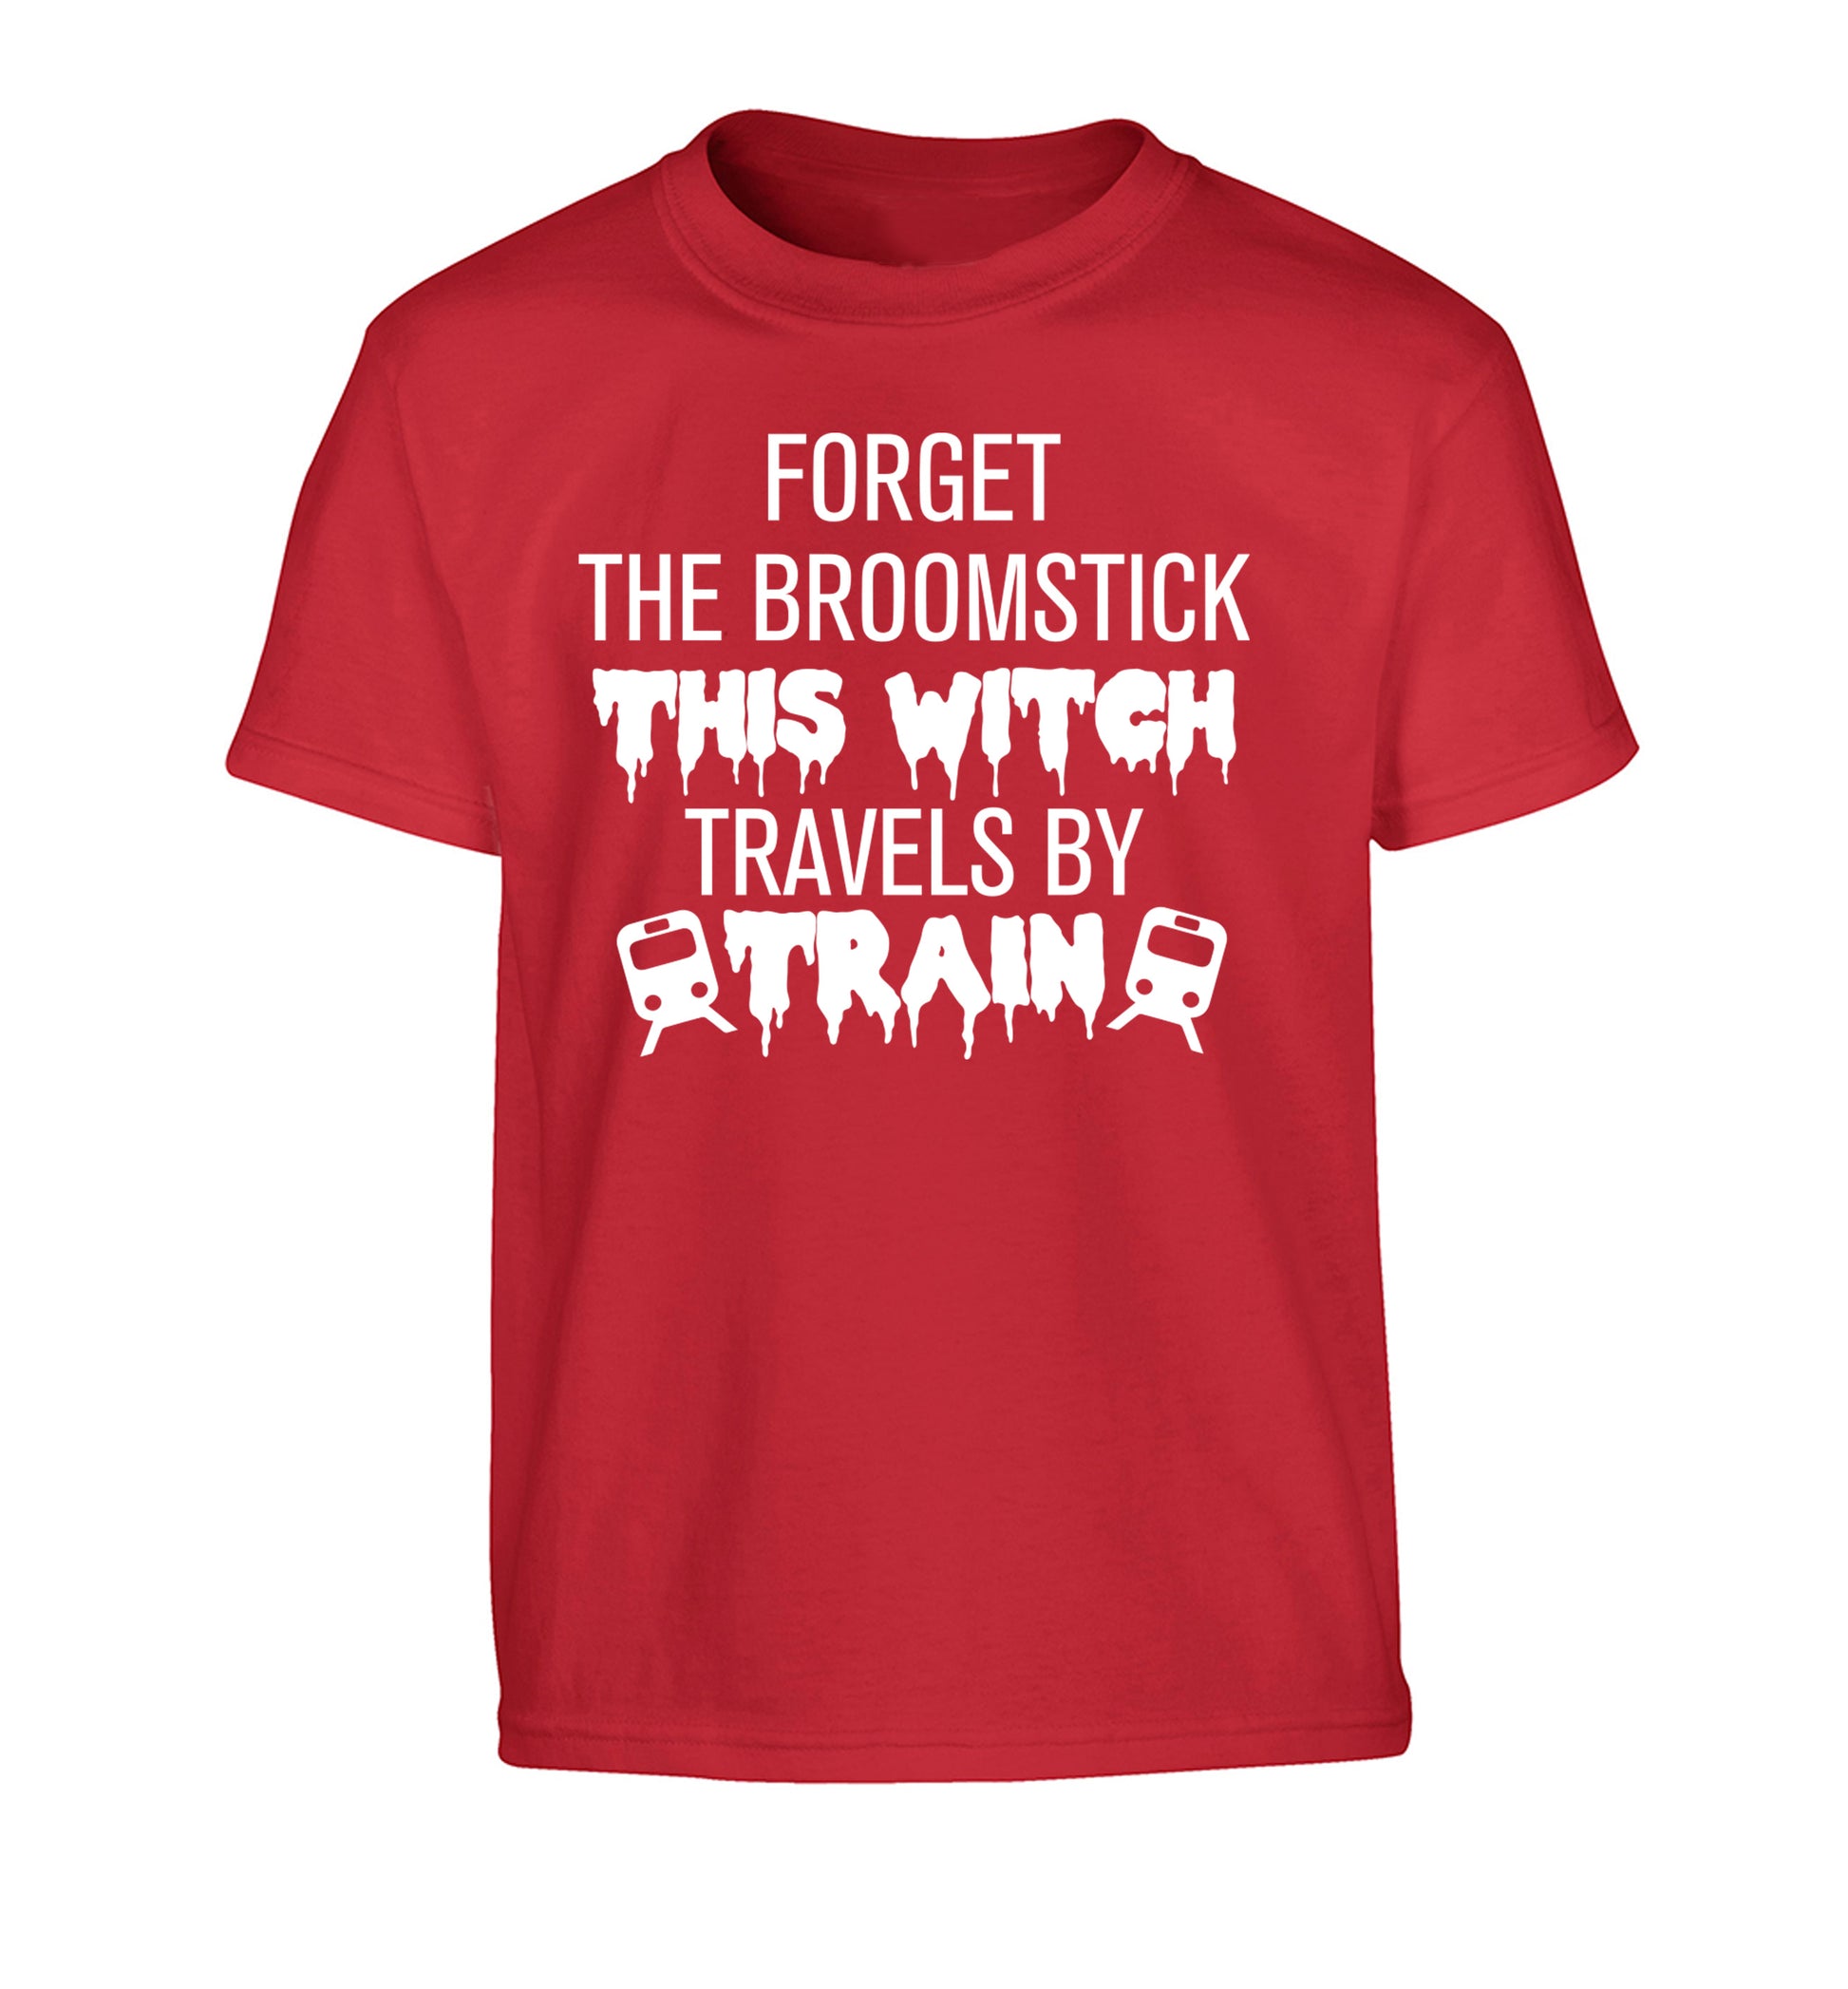 Forget the broomstick this witch travels by train Children's red Tshirt 12-14 Years